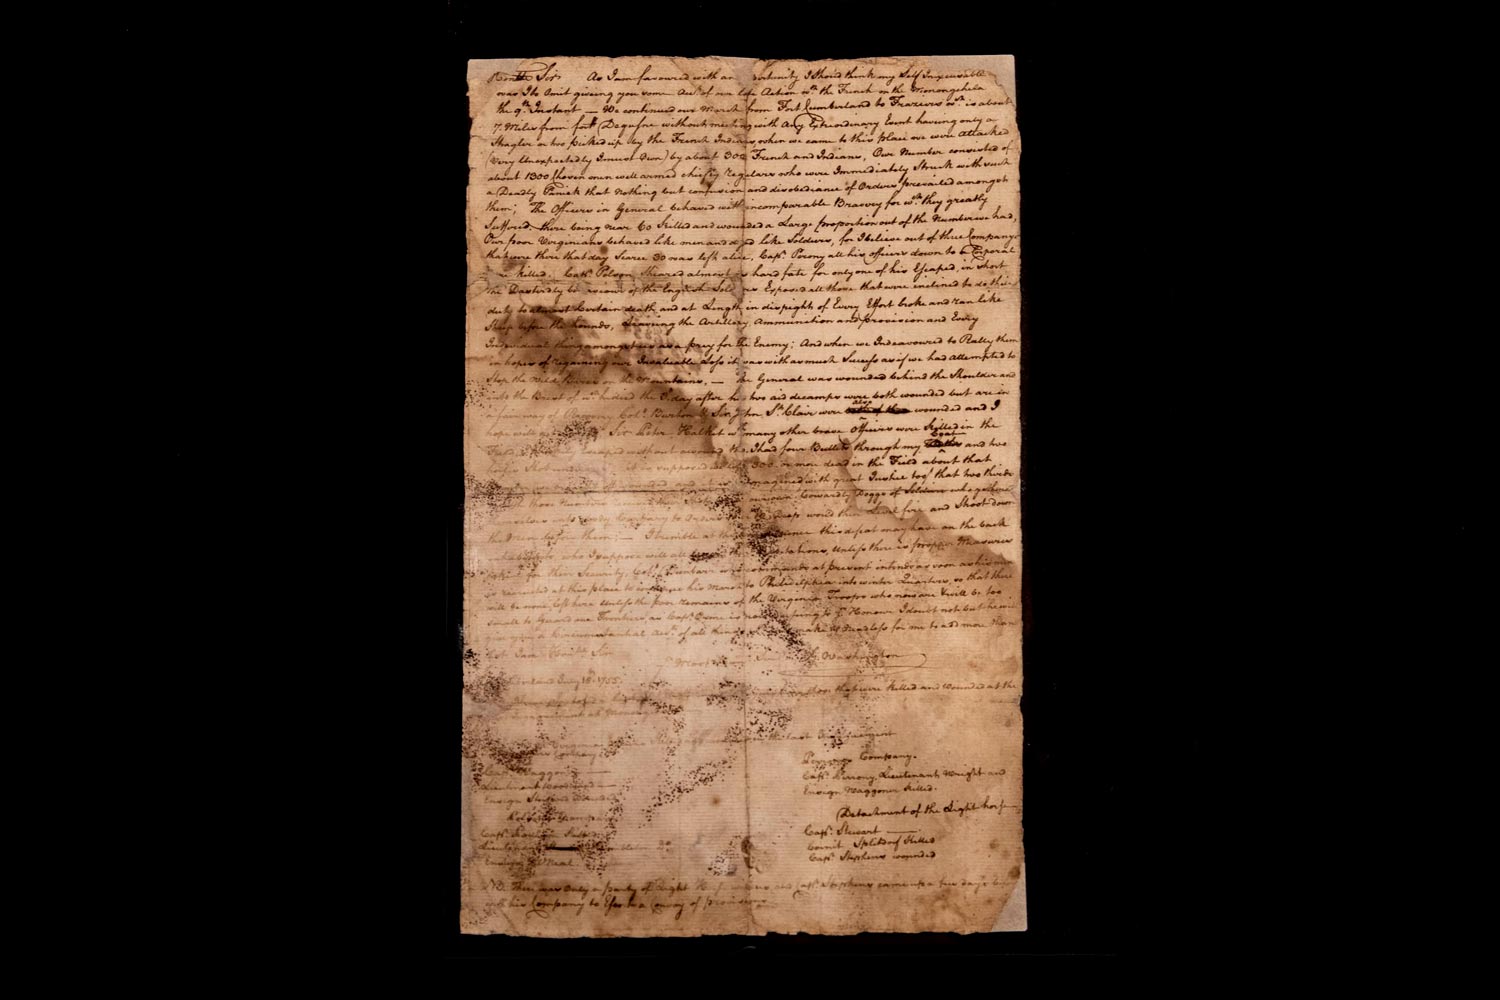 George Washington wrote this 1755 letter to Col. Gov. Robert Dinwiddie, detailing the defeat of Gen. Edward Braddock at the Battle of Monongahela. 